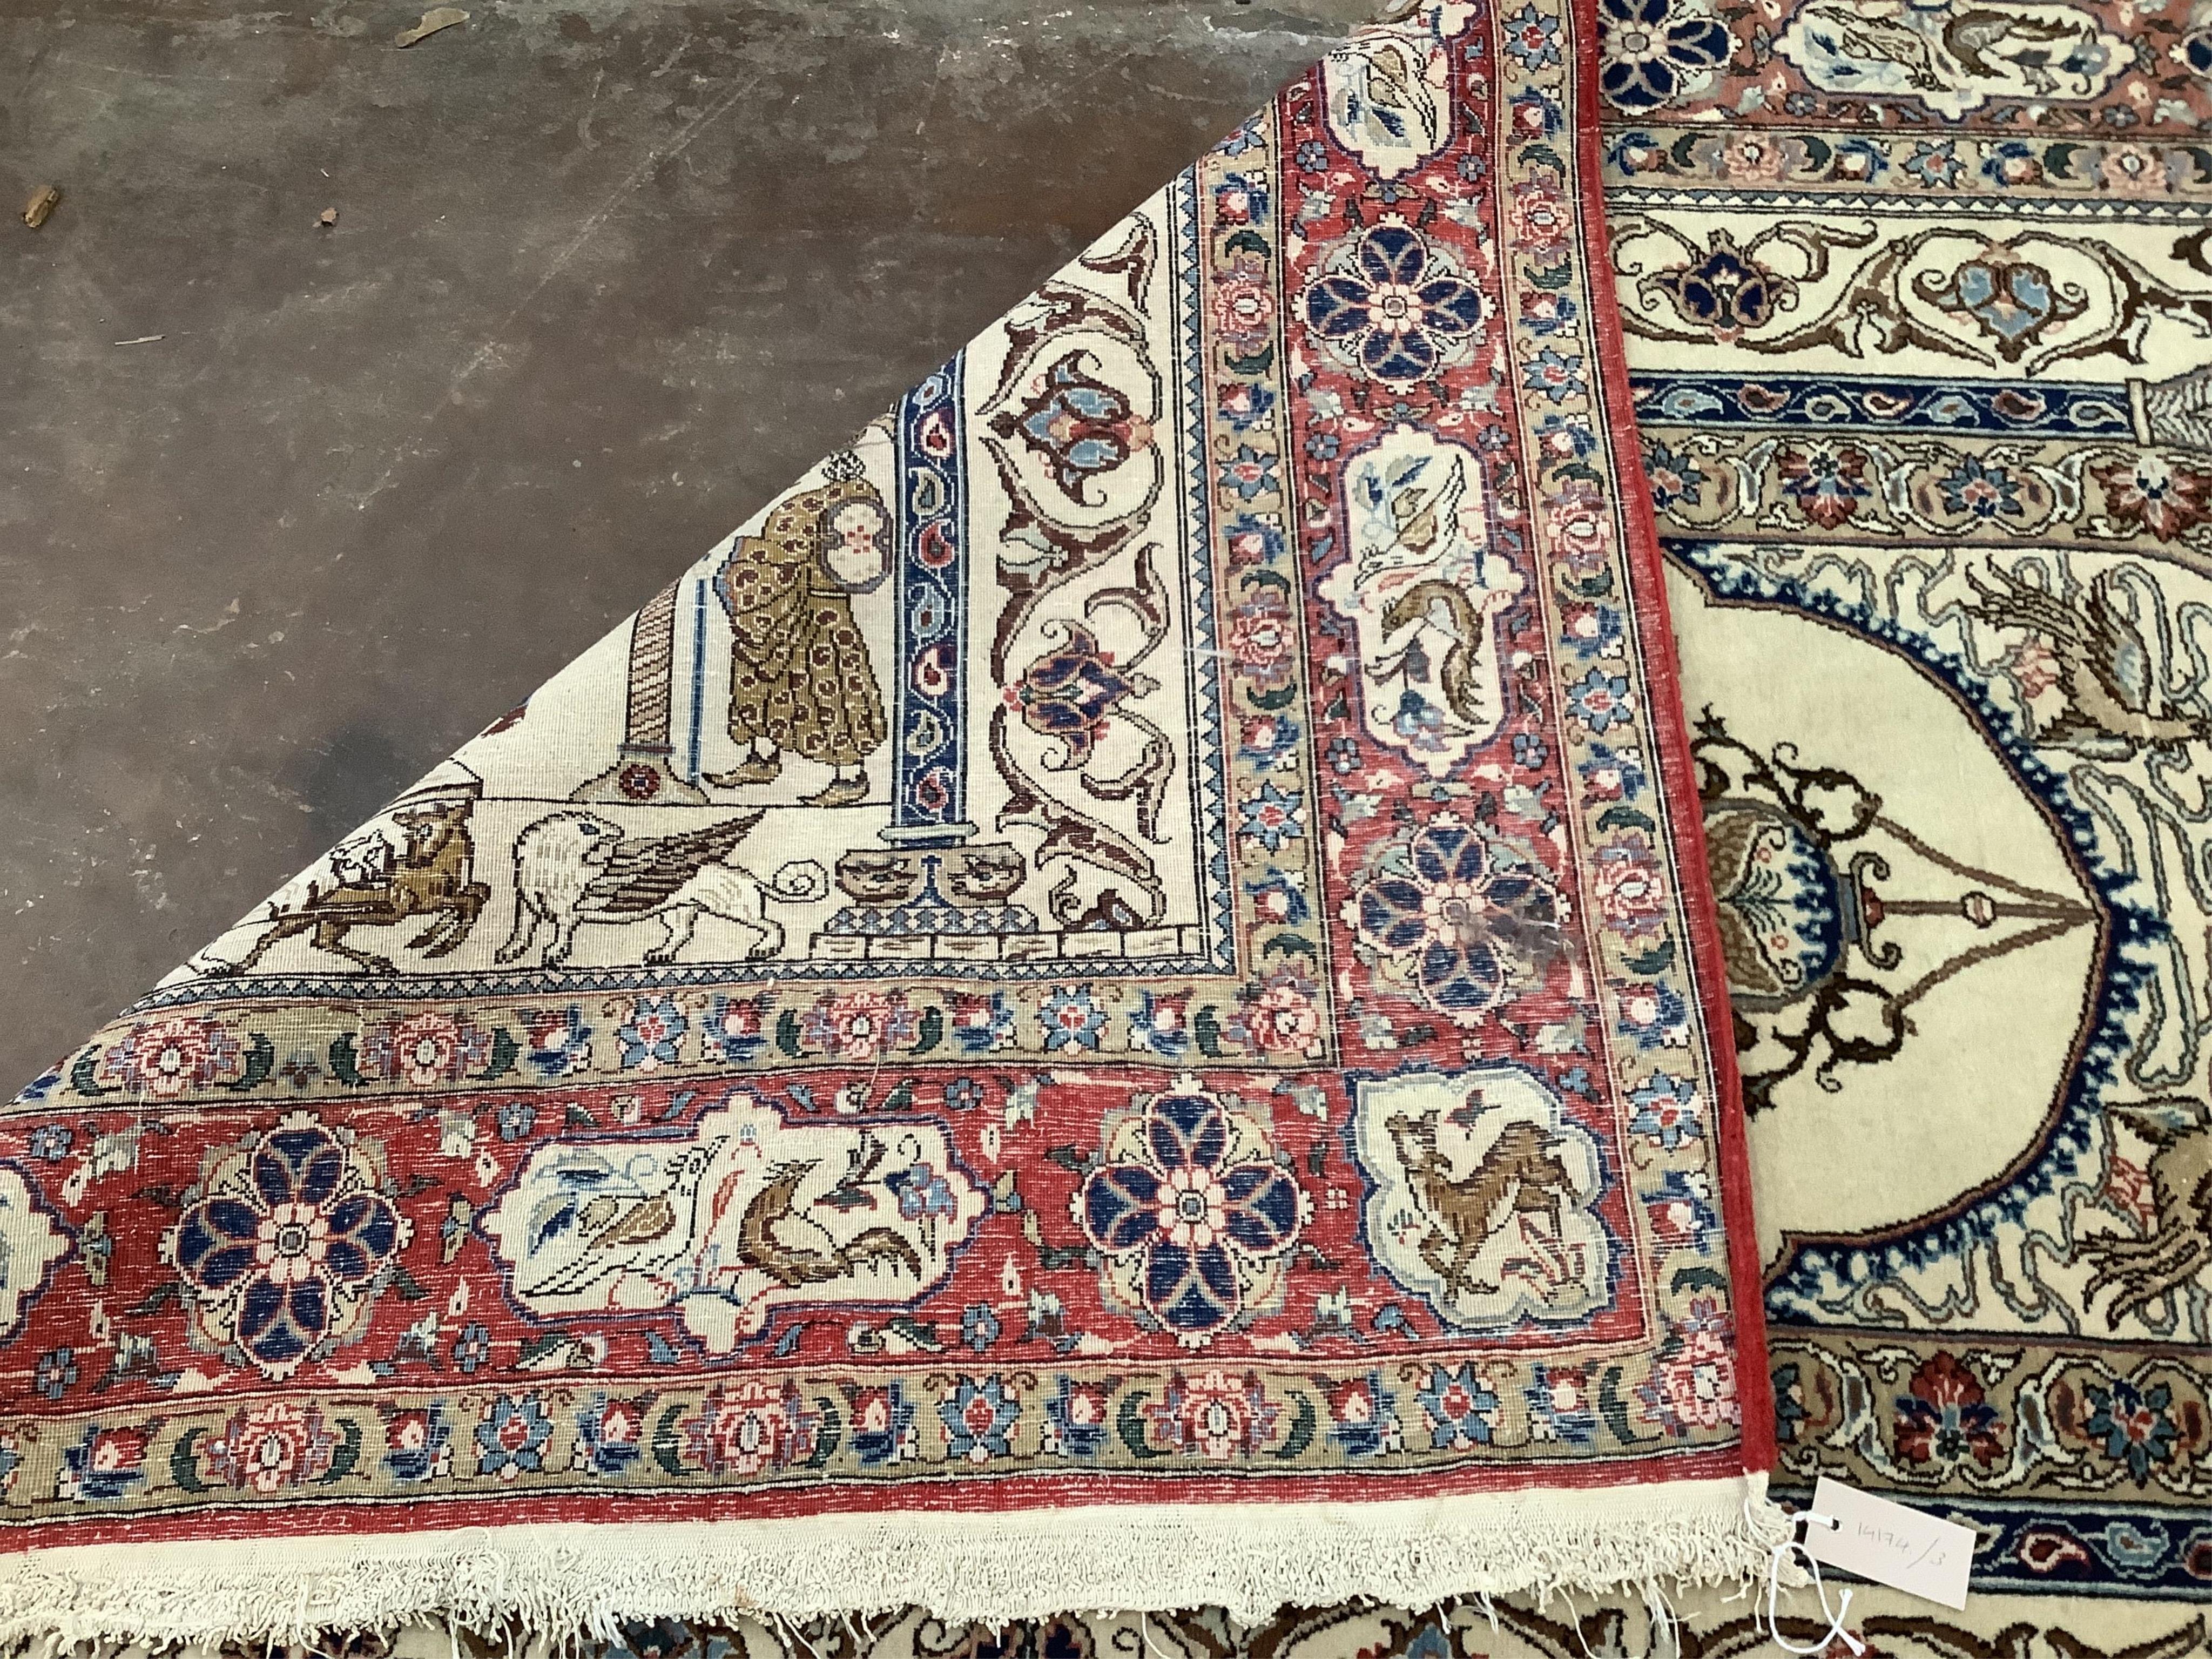 An unusual Isphahan pictorial prayer rug, woven with figures and animals, 195 x 140cm